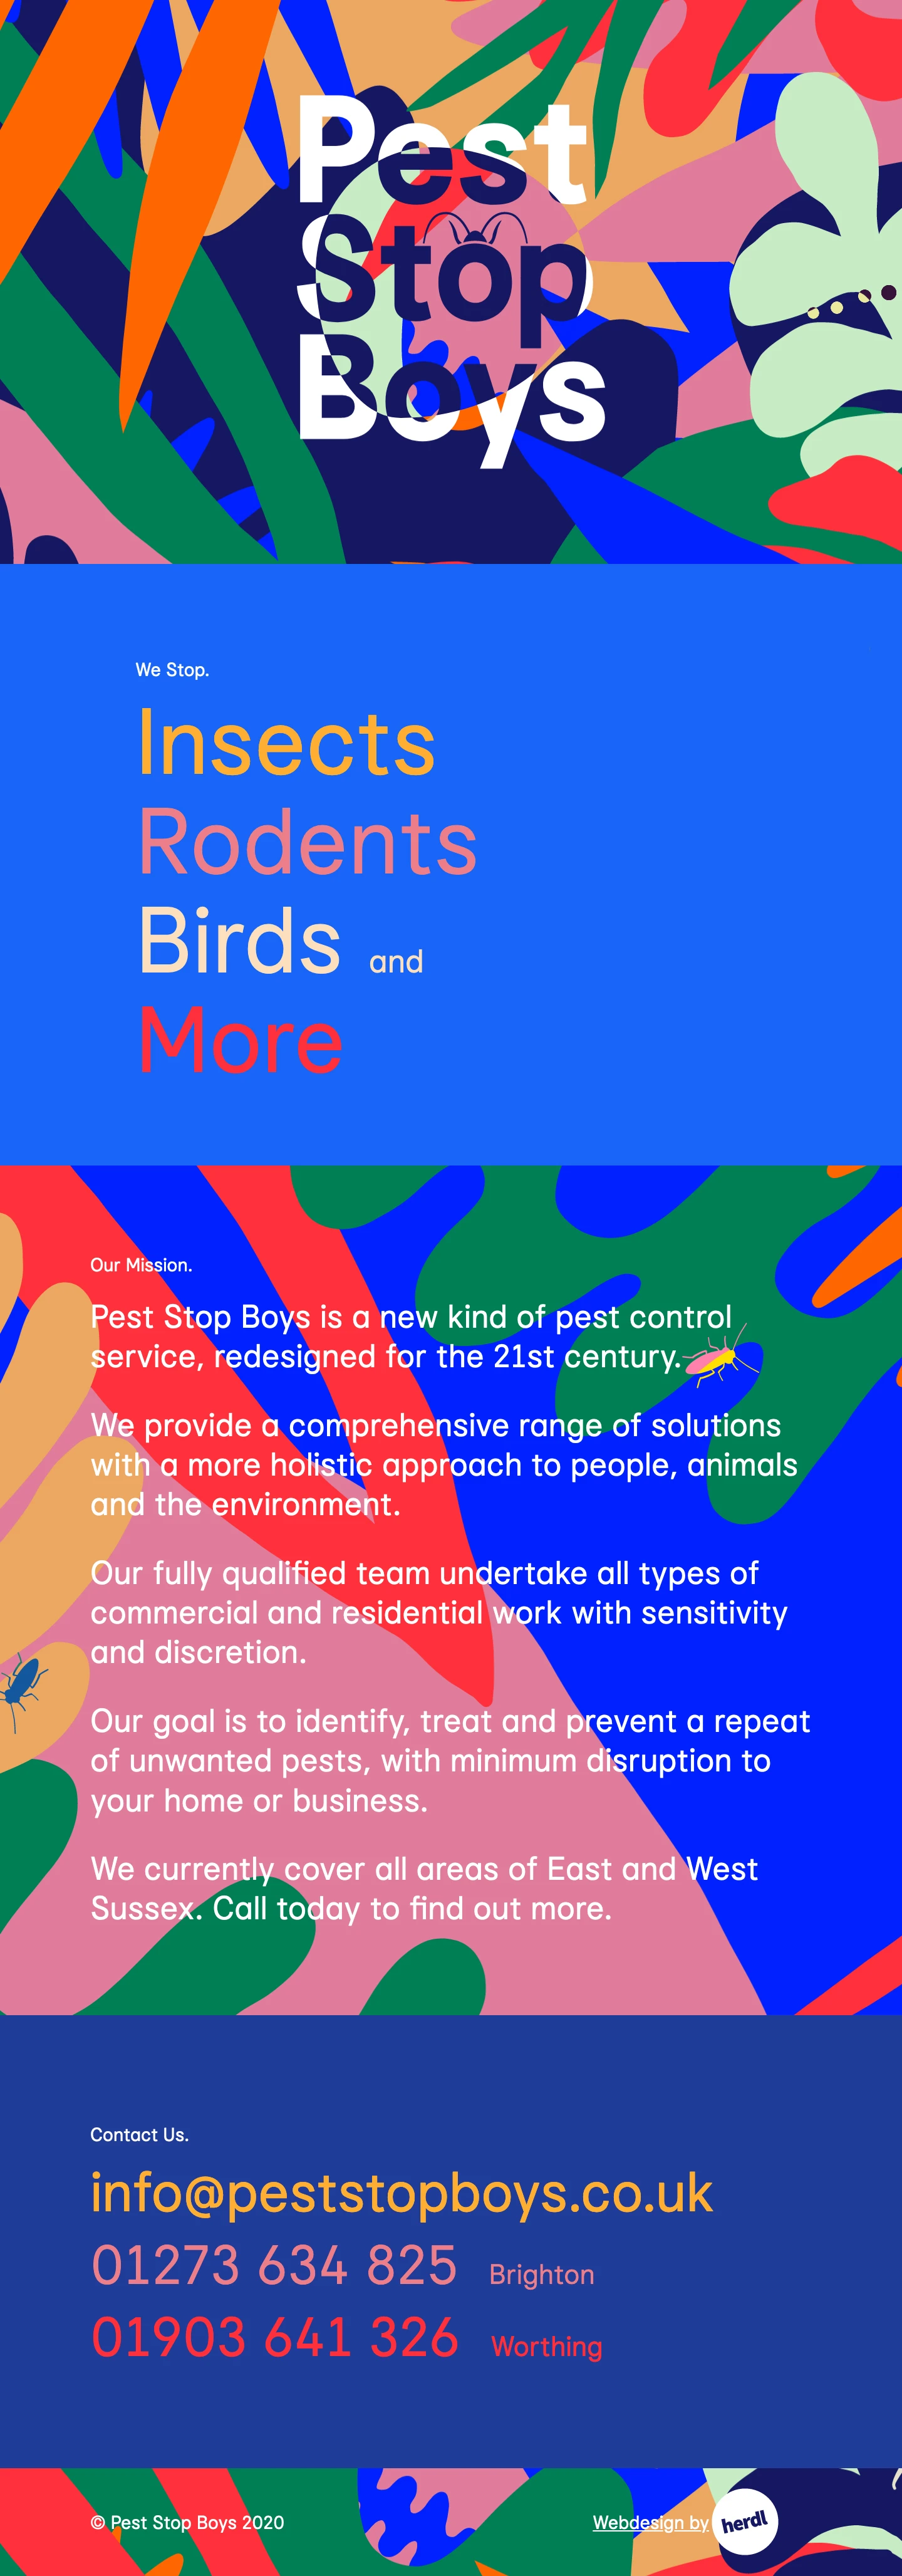 Pest Stop Boys Landing Page Example: A new type of pest control company with a more holistic approach to people, animals and the environment.